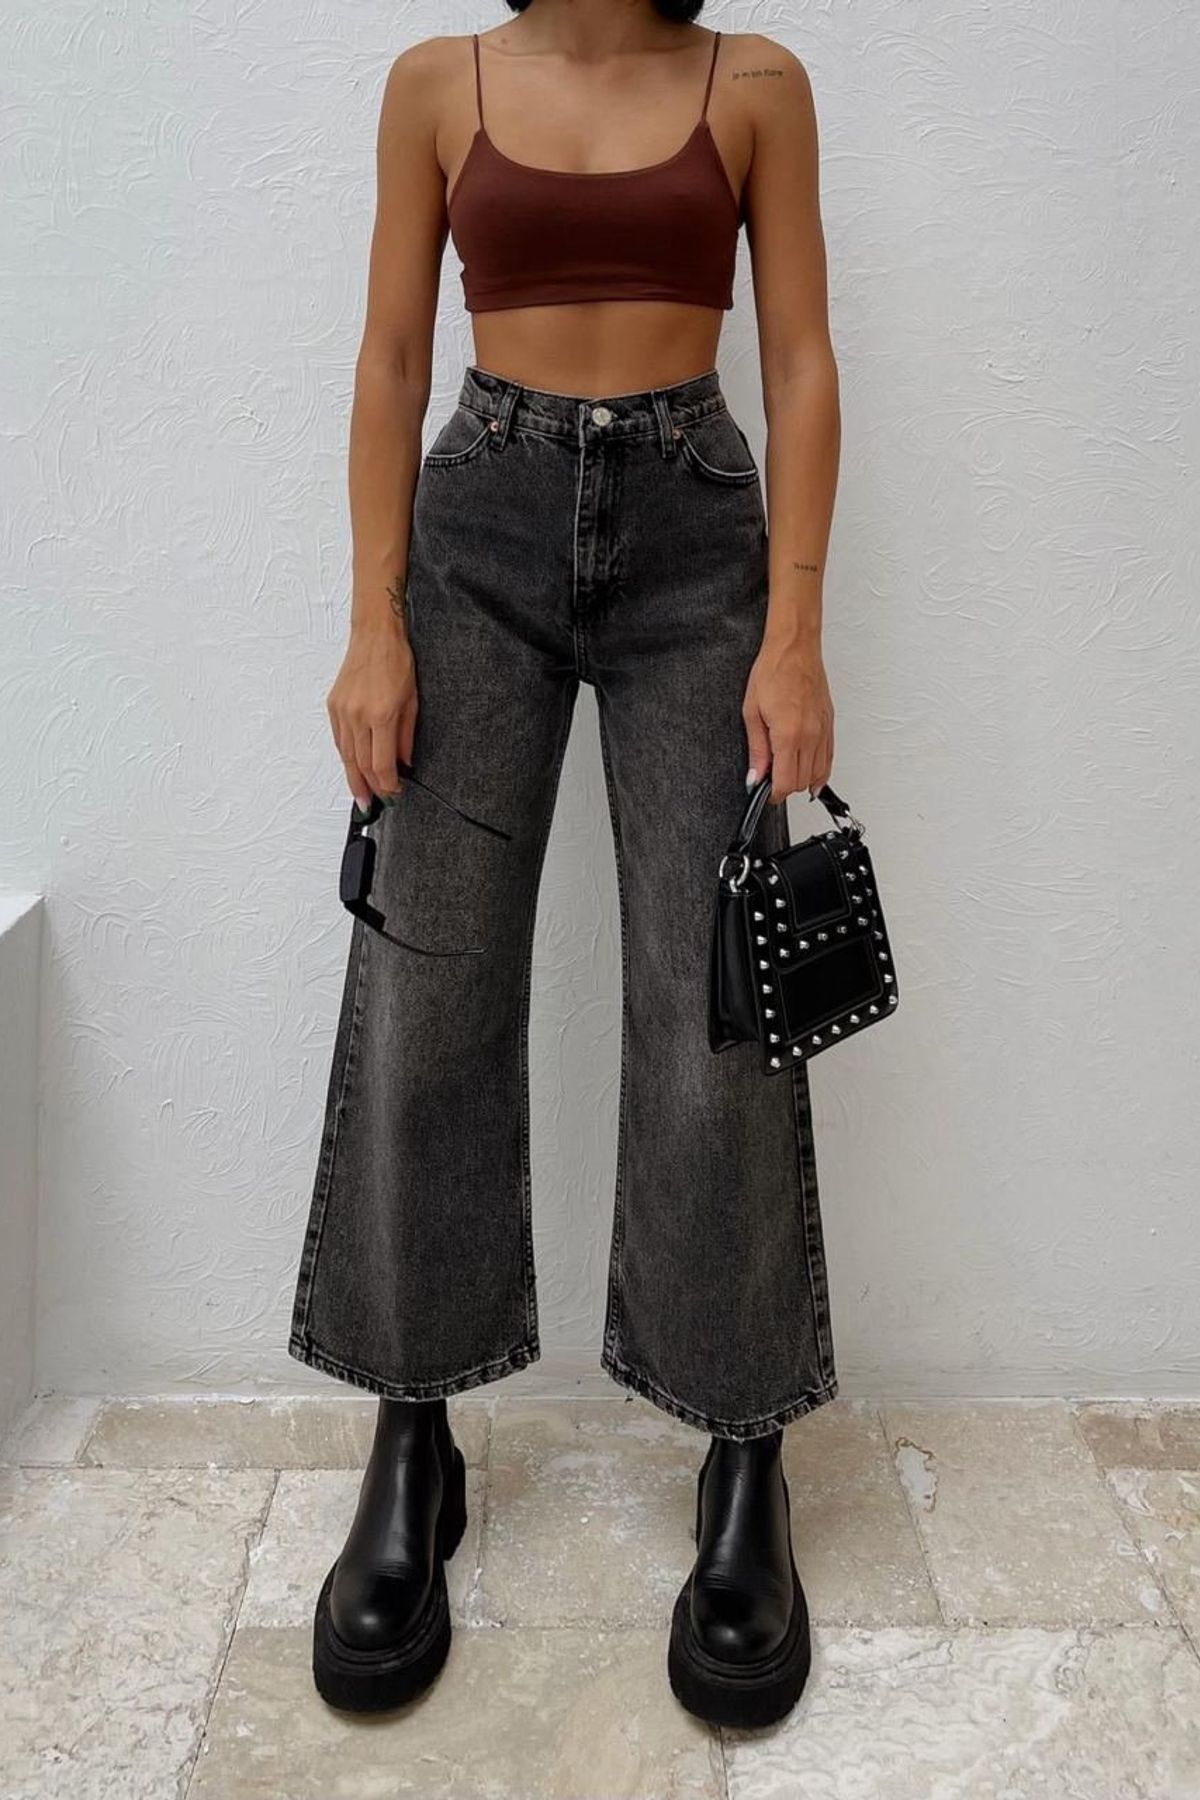 High Waist Cropped Jeans